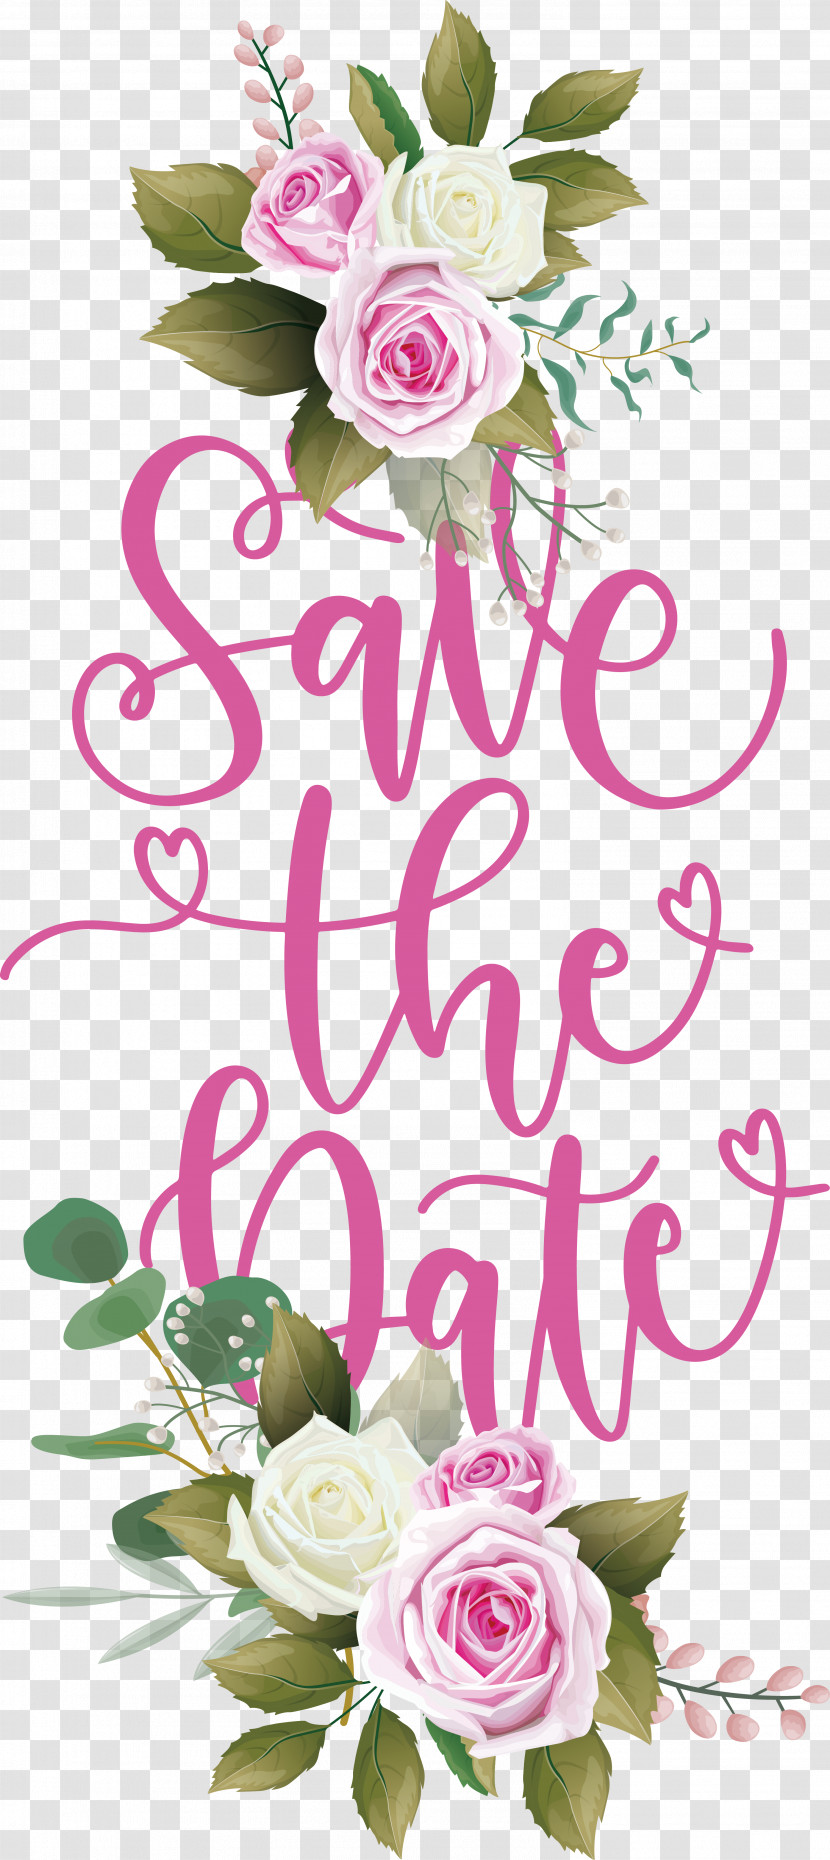 Save The Date Transparent PNG